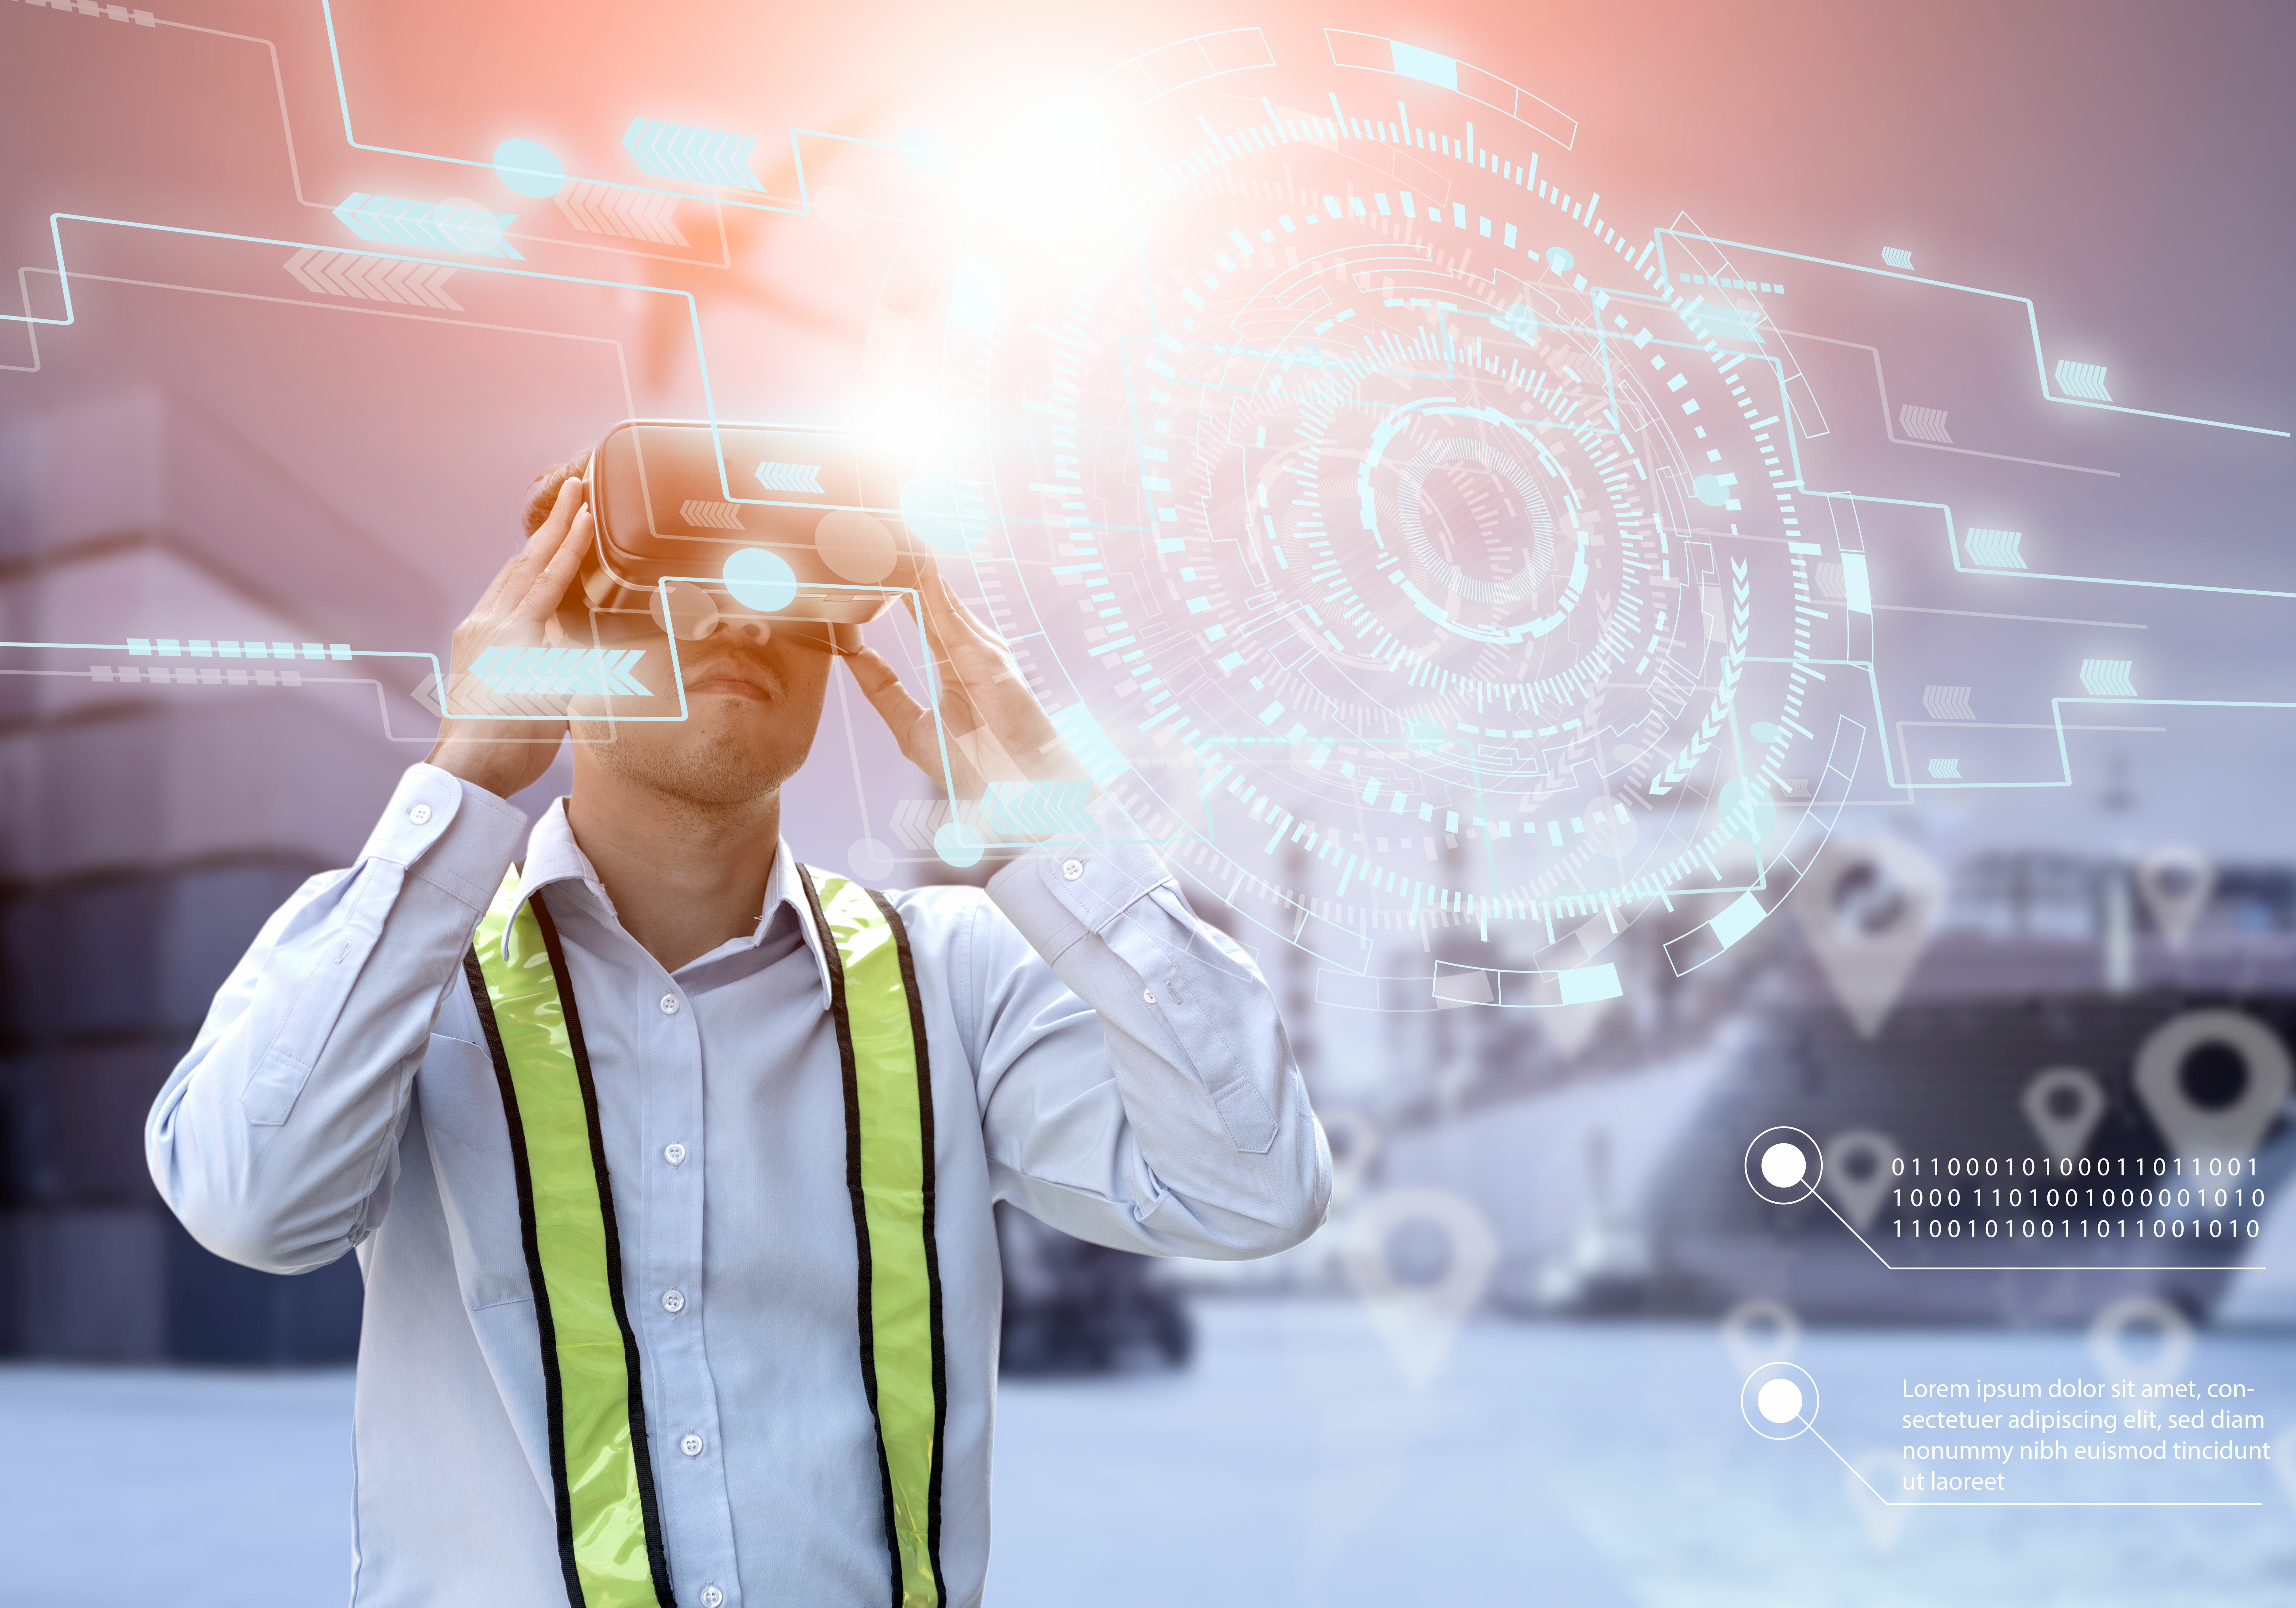 Honeywell is enhancing its industrial training expertise with augmented reality technology